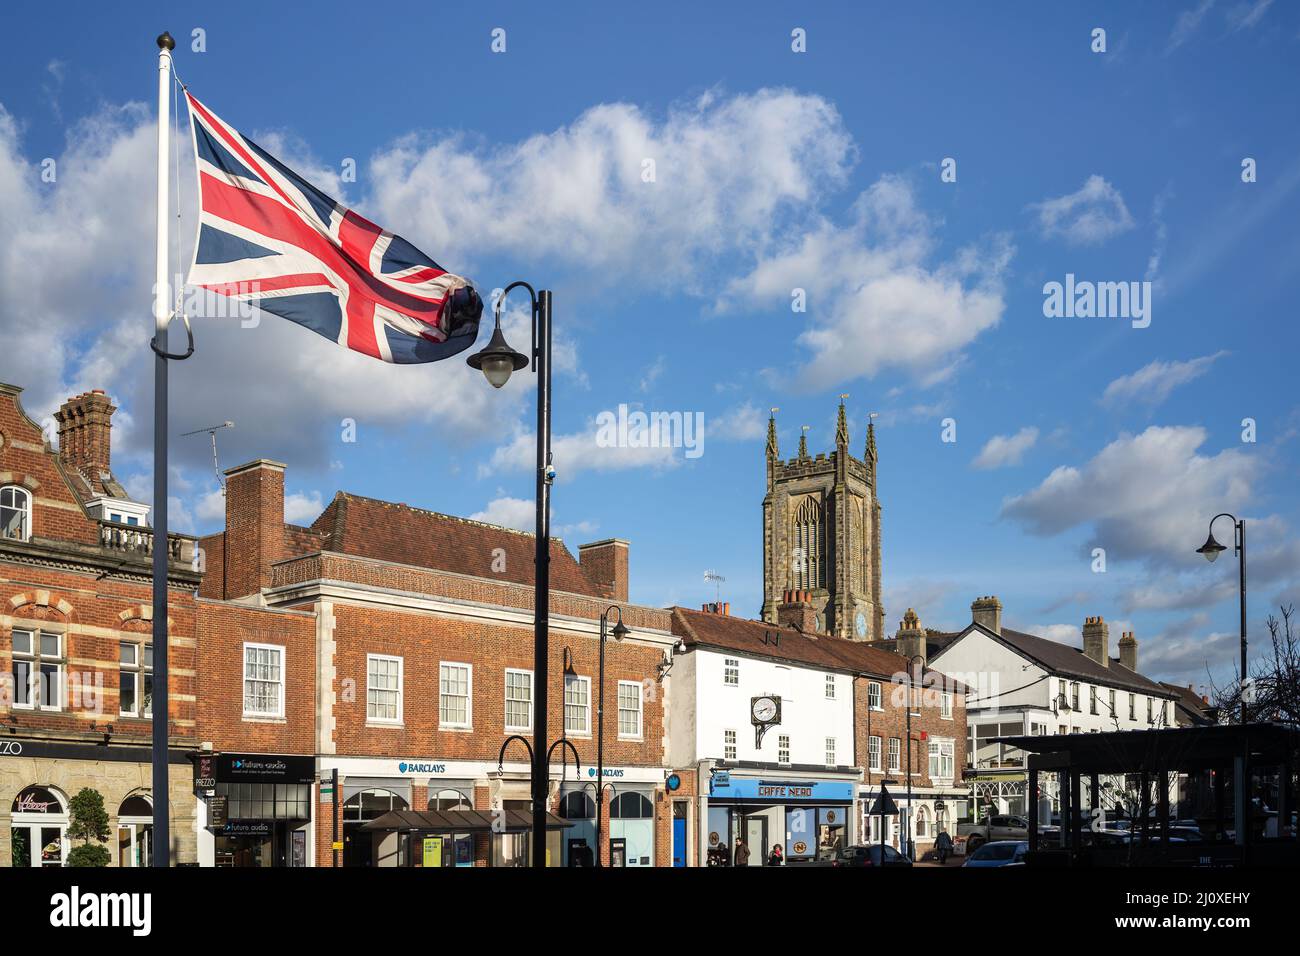 EAST GRINSTEAD, WEST SUSSEX, UK - JANUARY 31: Skyline of East Grinstead on January 31, 2022. Four unidentified people Stock Photo